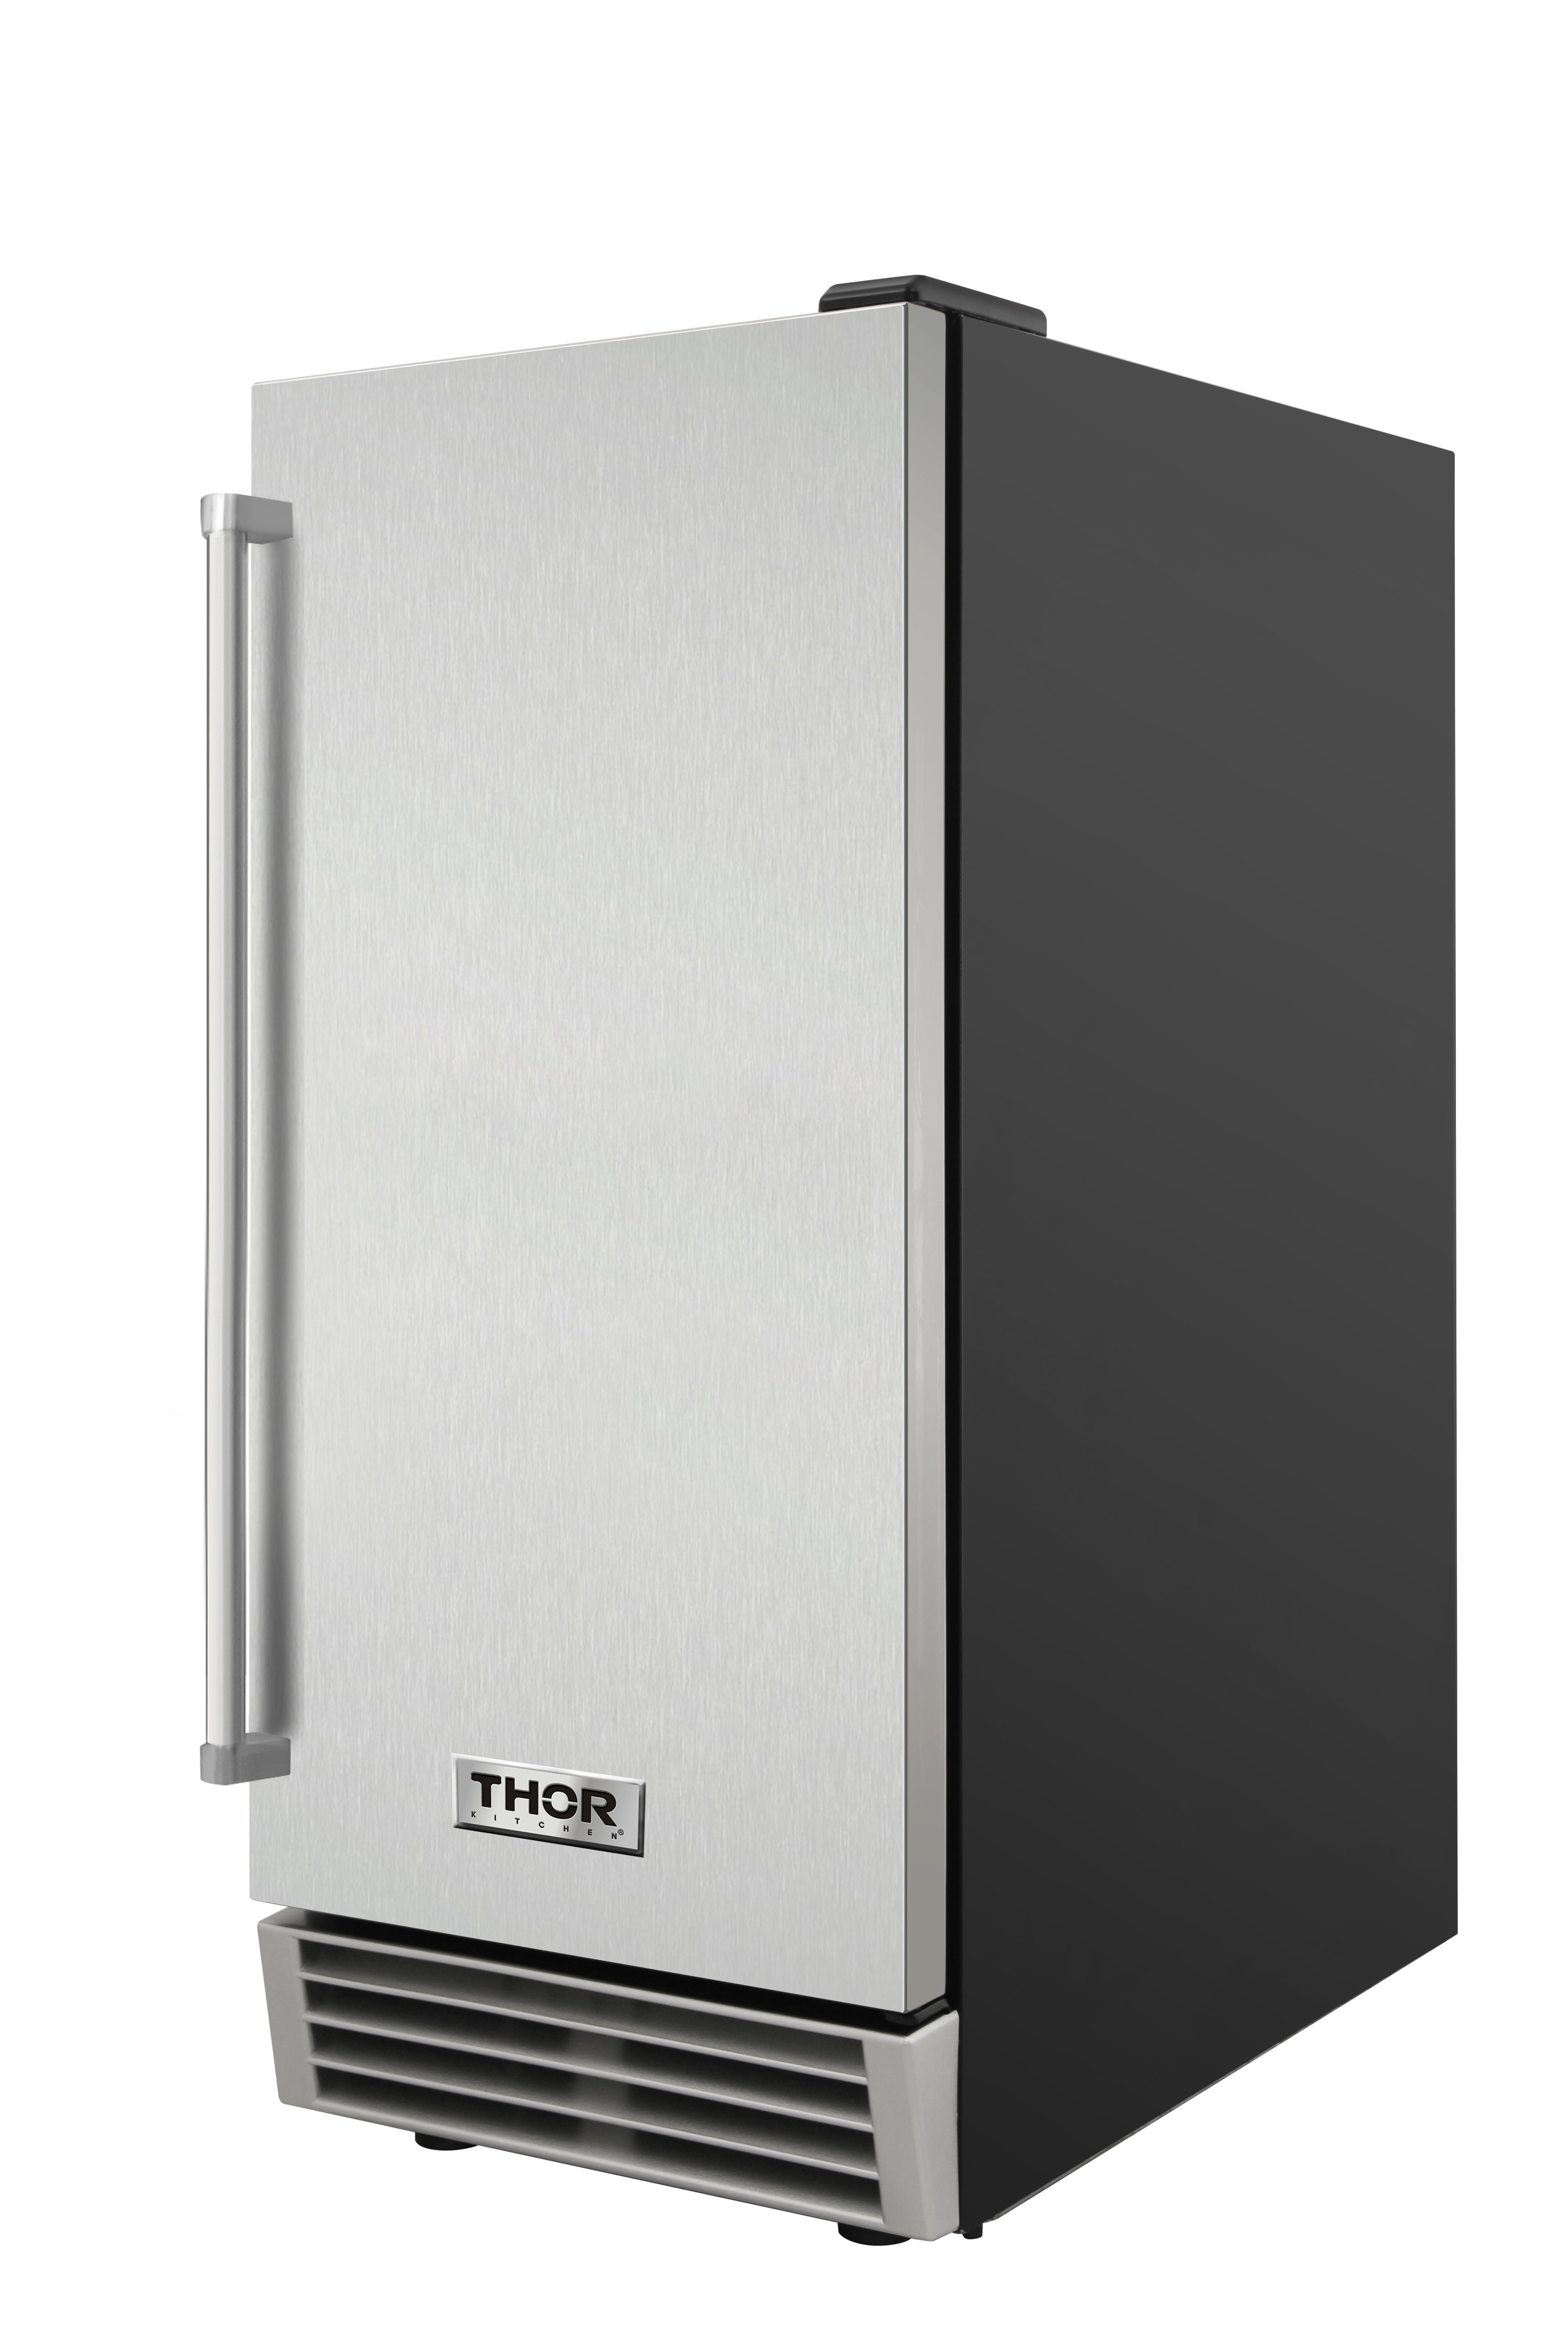 Thor Kitchen 15 Inch Built-In Ice Maker in Stainless Steel- Model TIM1501 (Renewed)